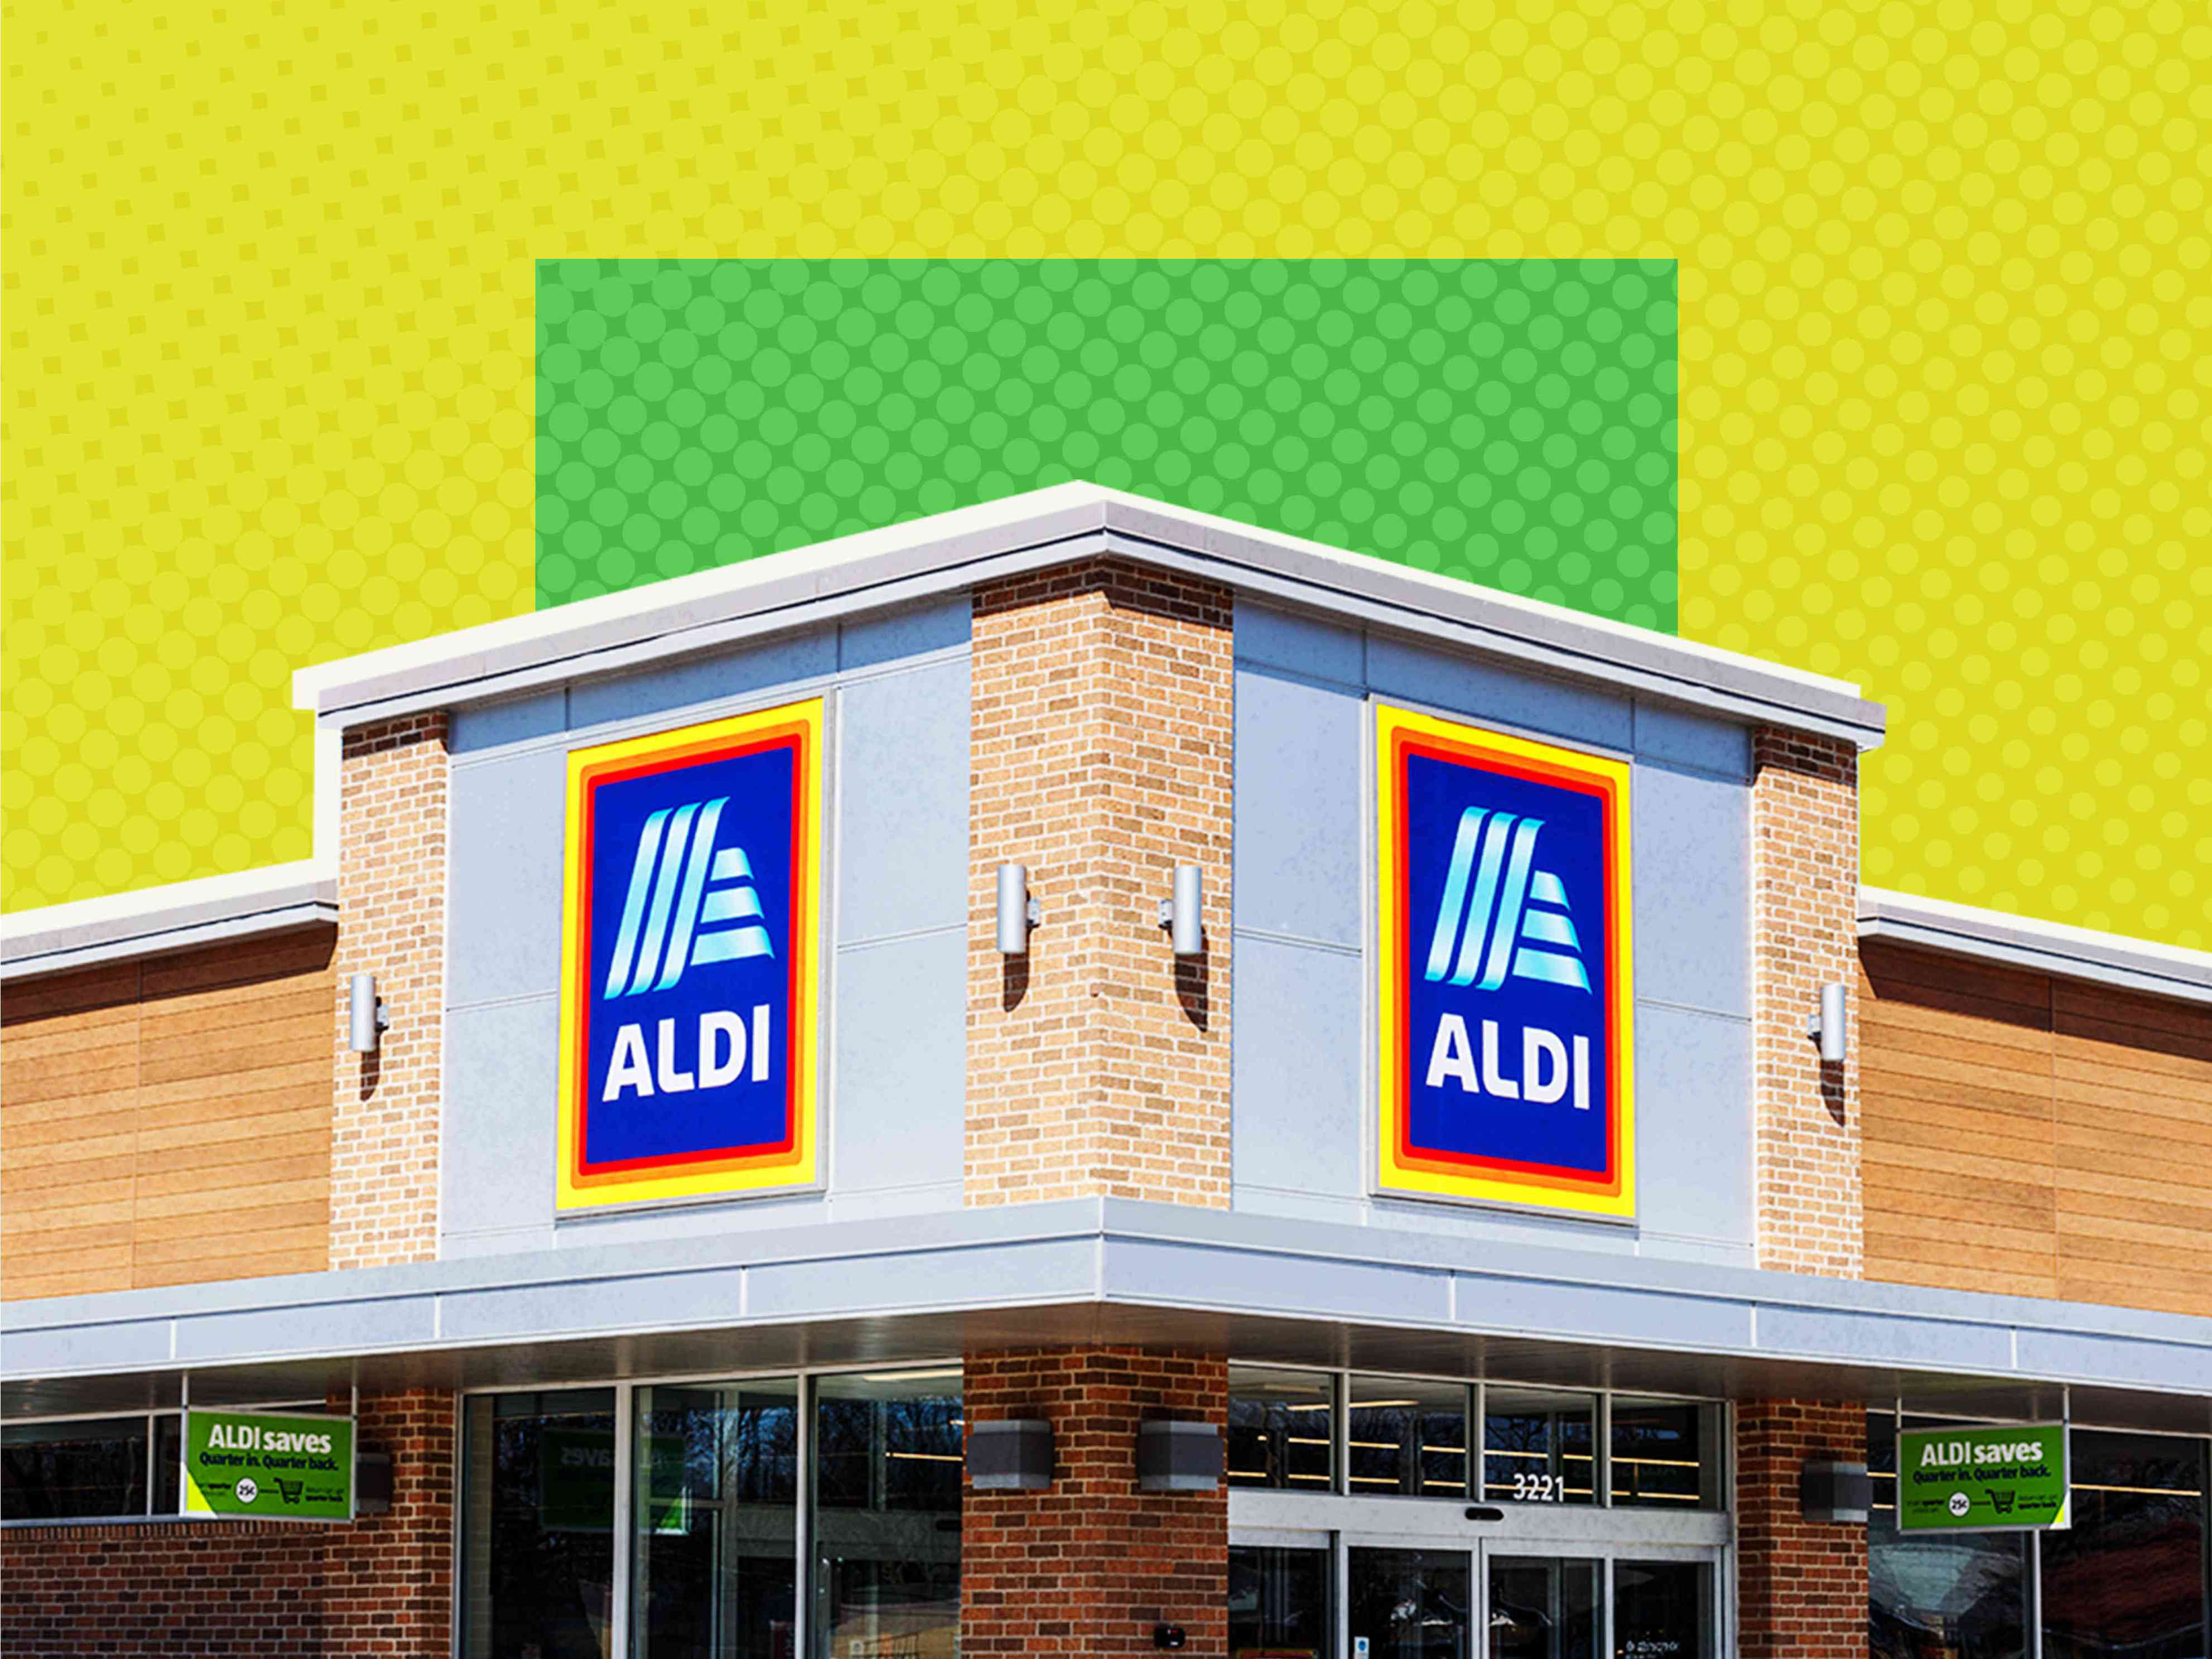 aldi is slashing prices on 250 summer products to save customers $100 million